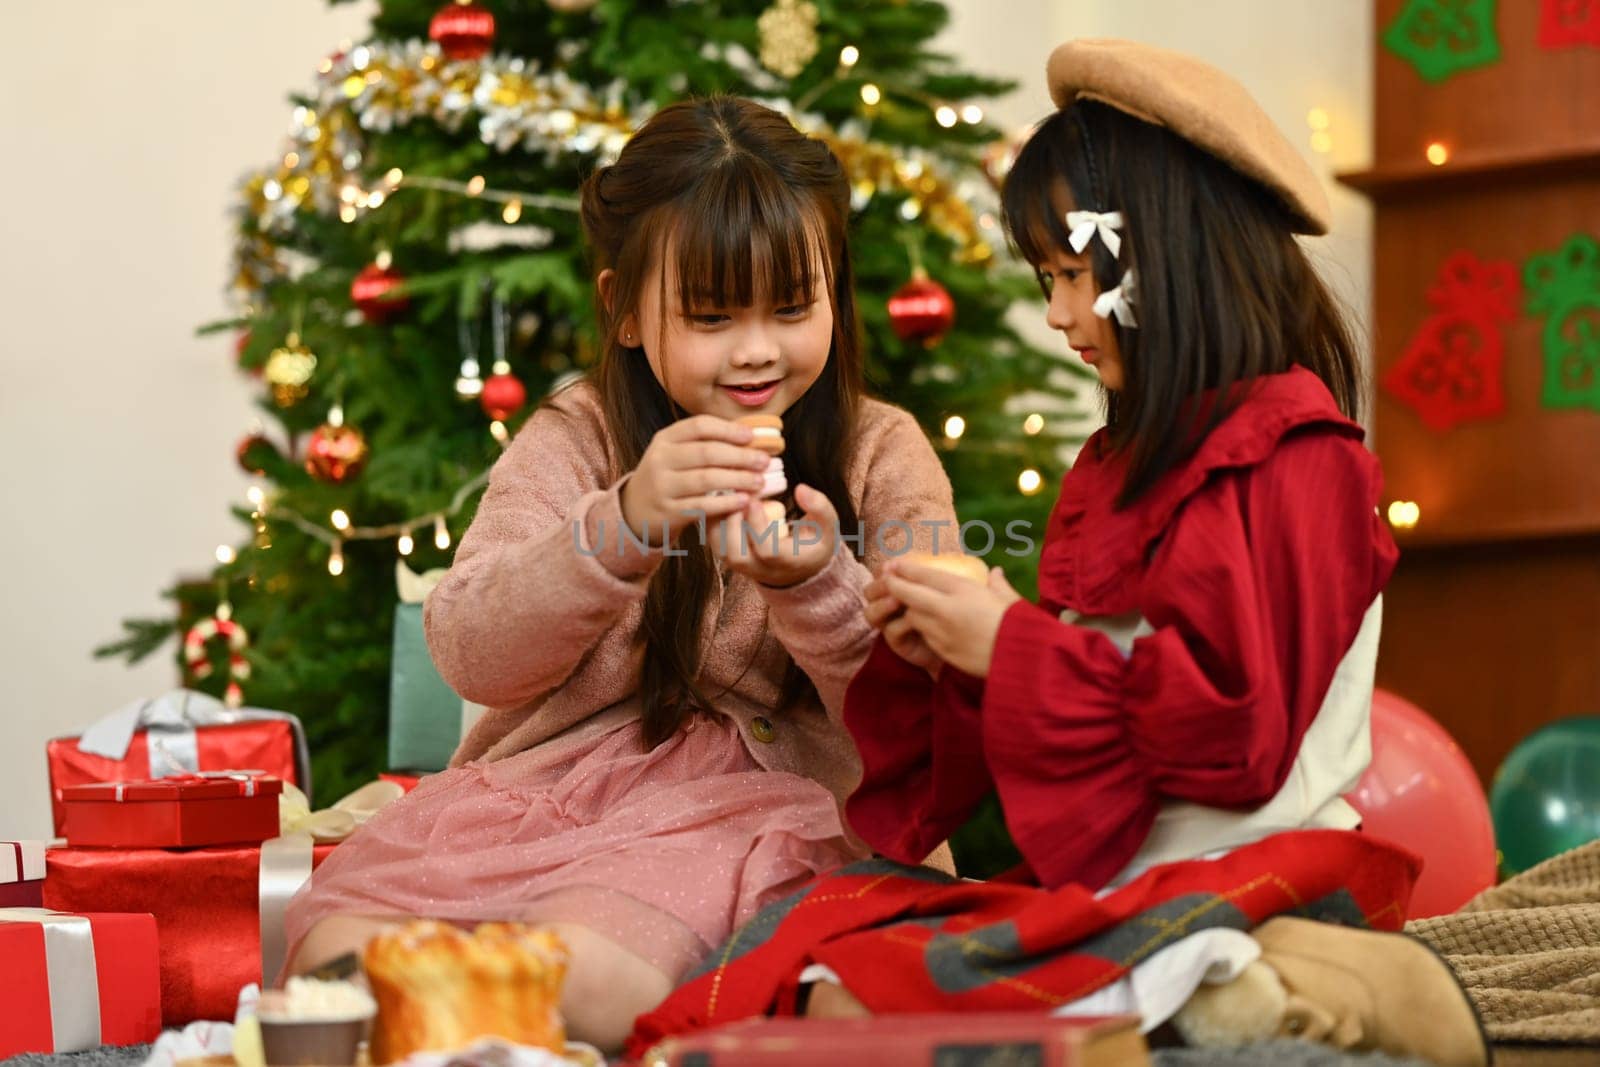 Cute little girls enjoying the warm Christmas atmosphere in cozy living room.